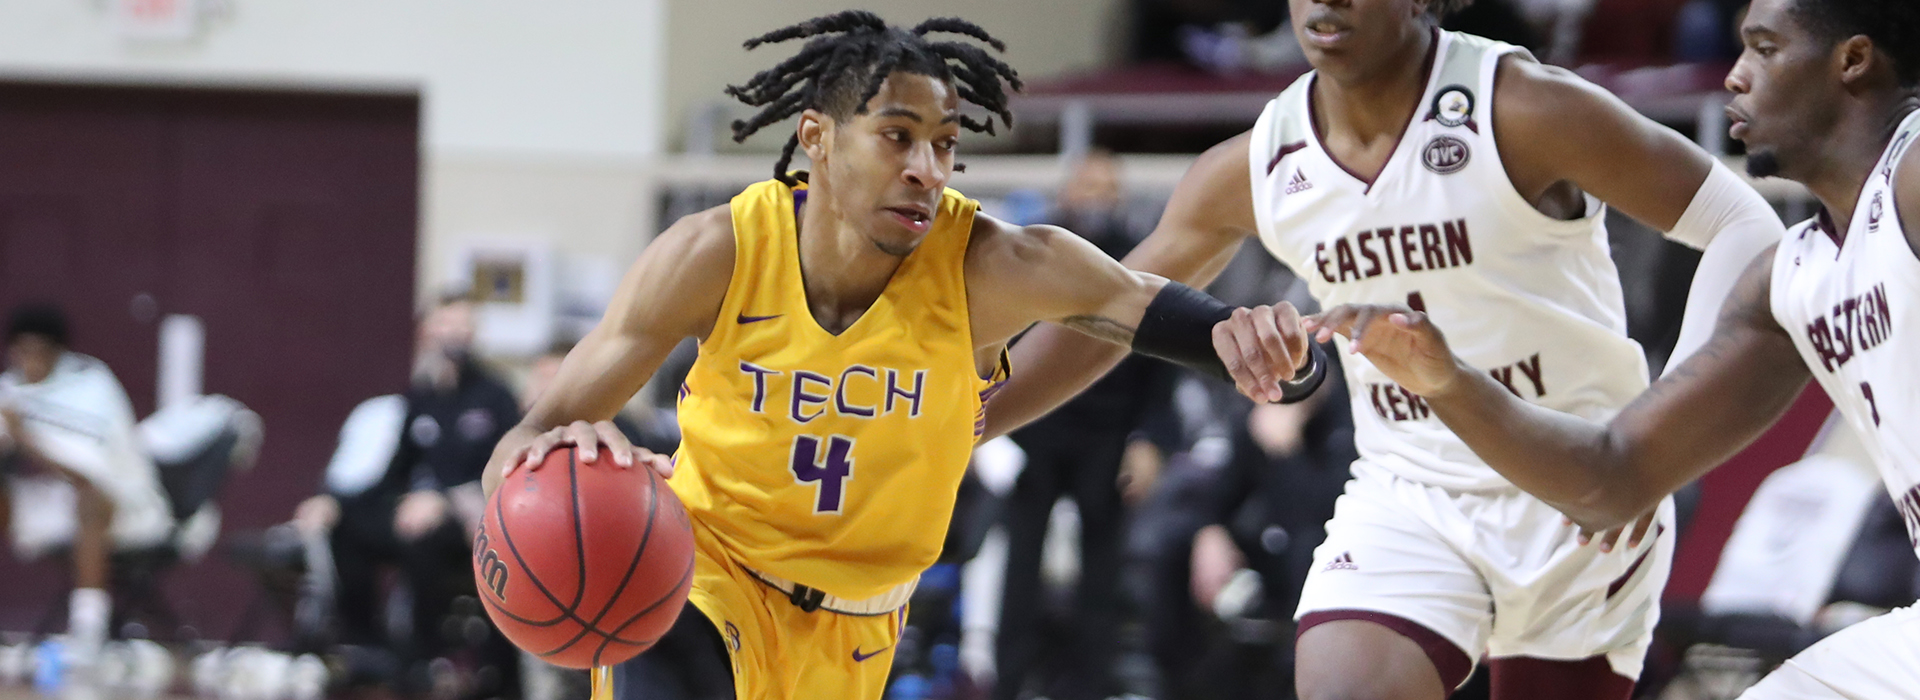 Golden Eagles fall to red-hot Colonels in barn burner in Richmond